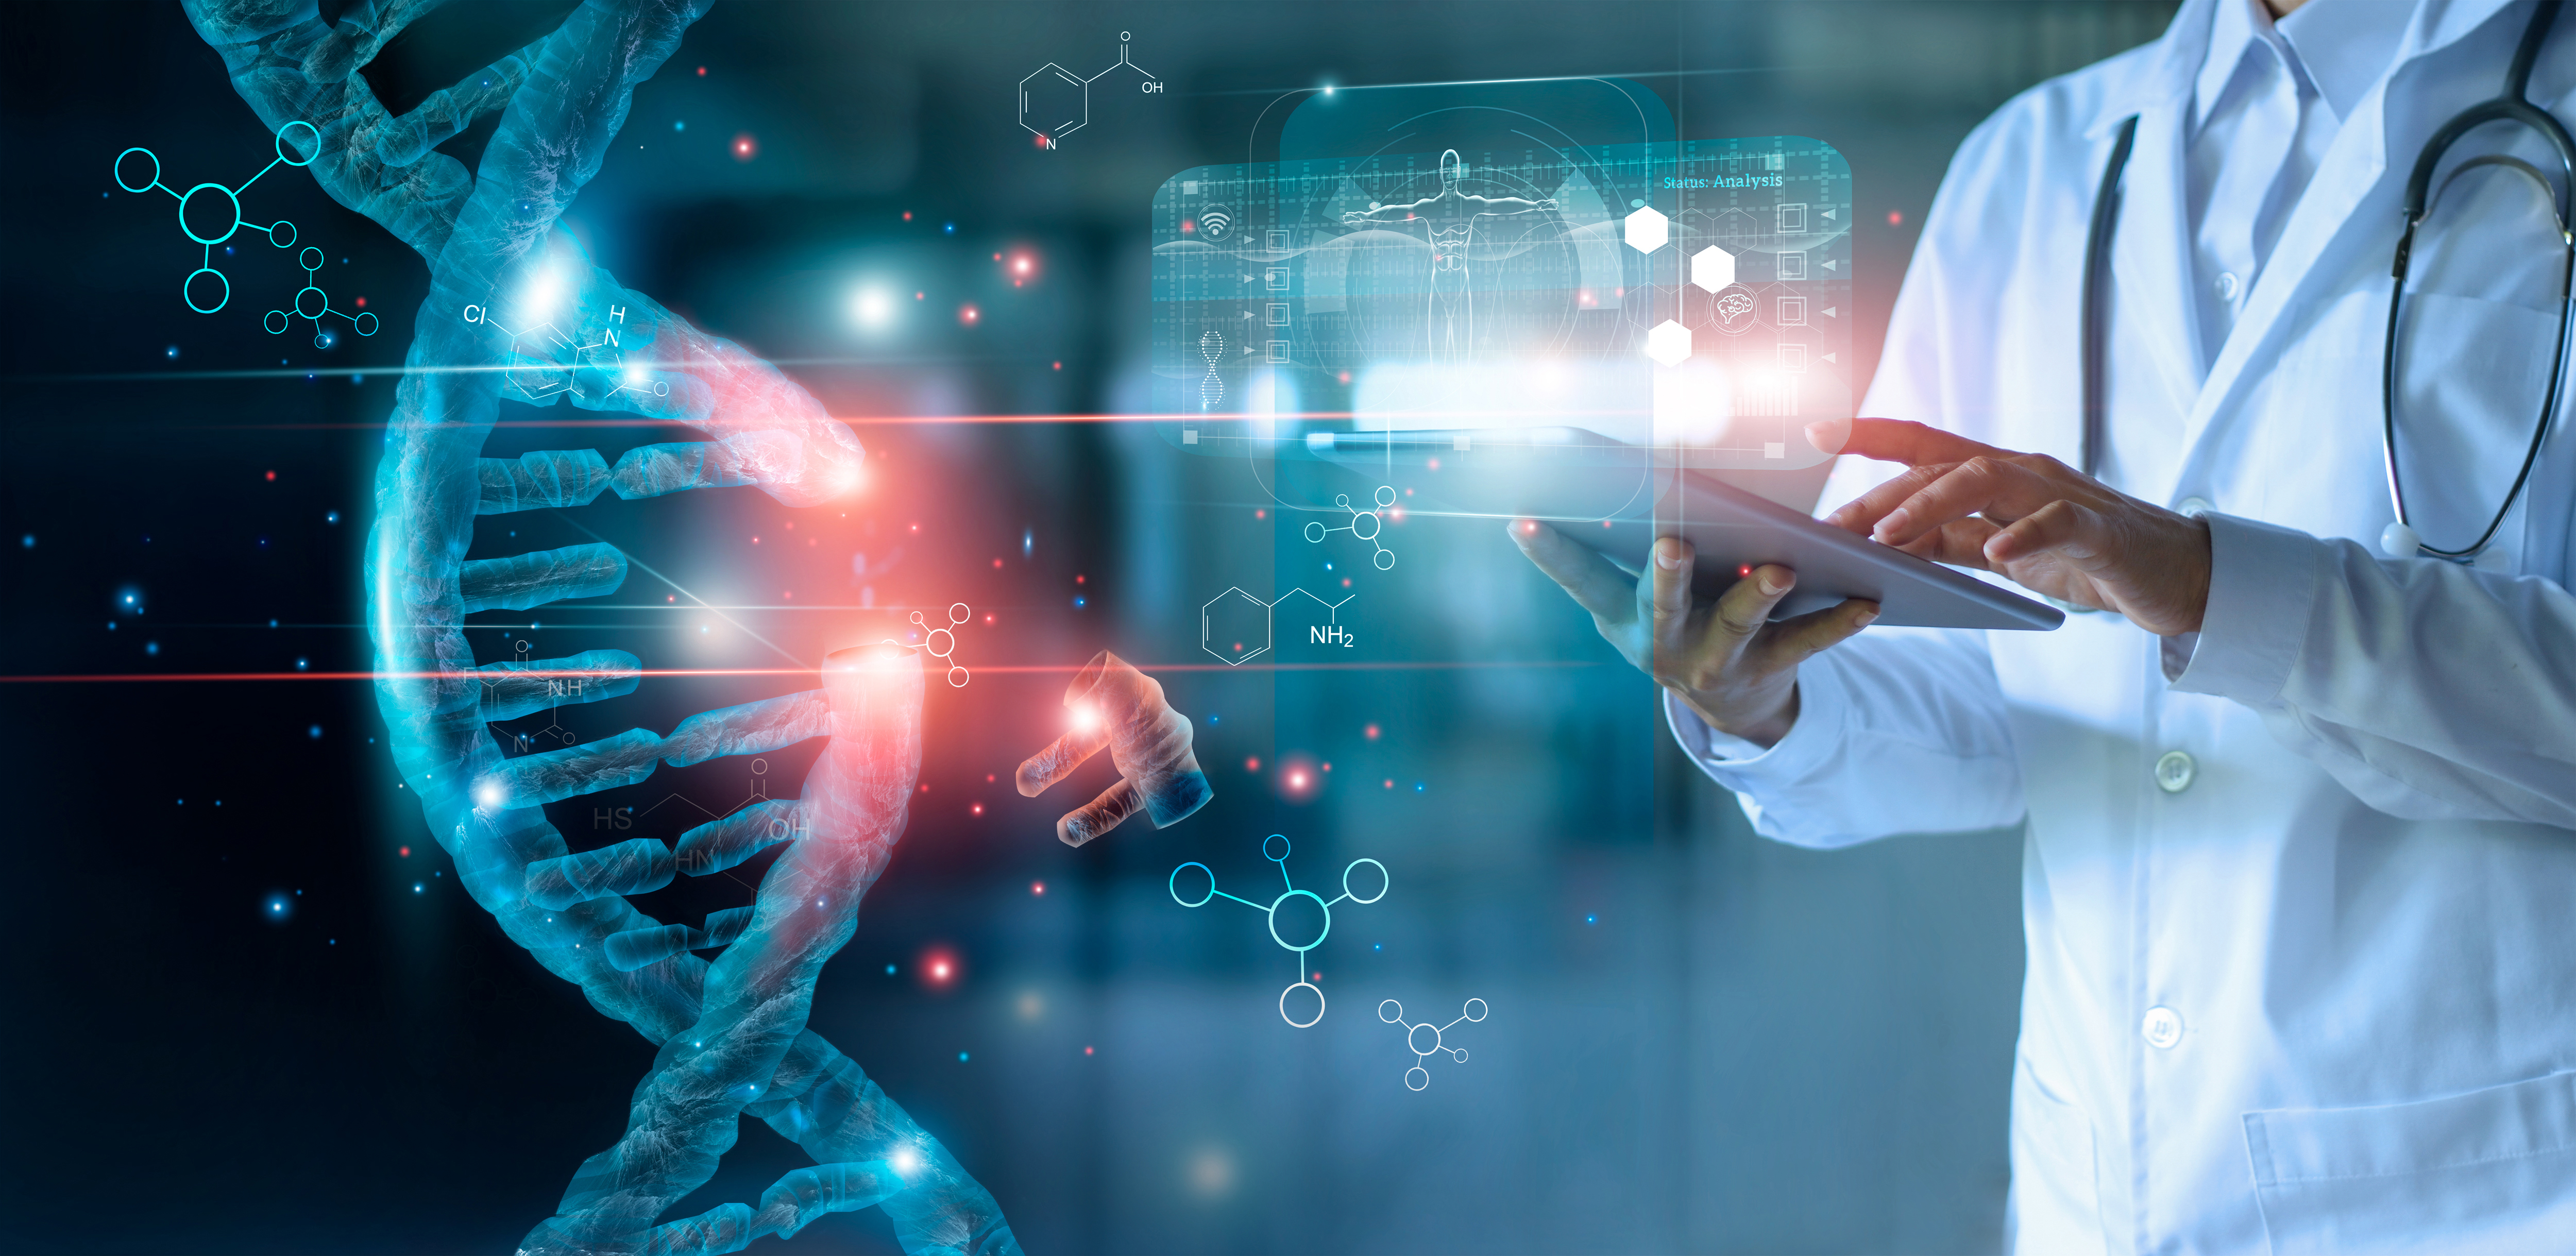 A Complete Life Sciences Solution Employ a single-vendor solution that offers a risk-based approach for asset management to address Food and Drug Administration (FDA) regulations, including Good Manufacturing Practices (GMP) and FDA 21 CFR Part 11